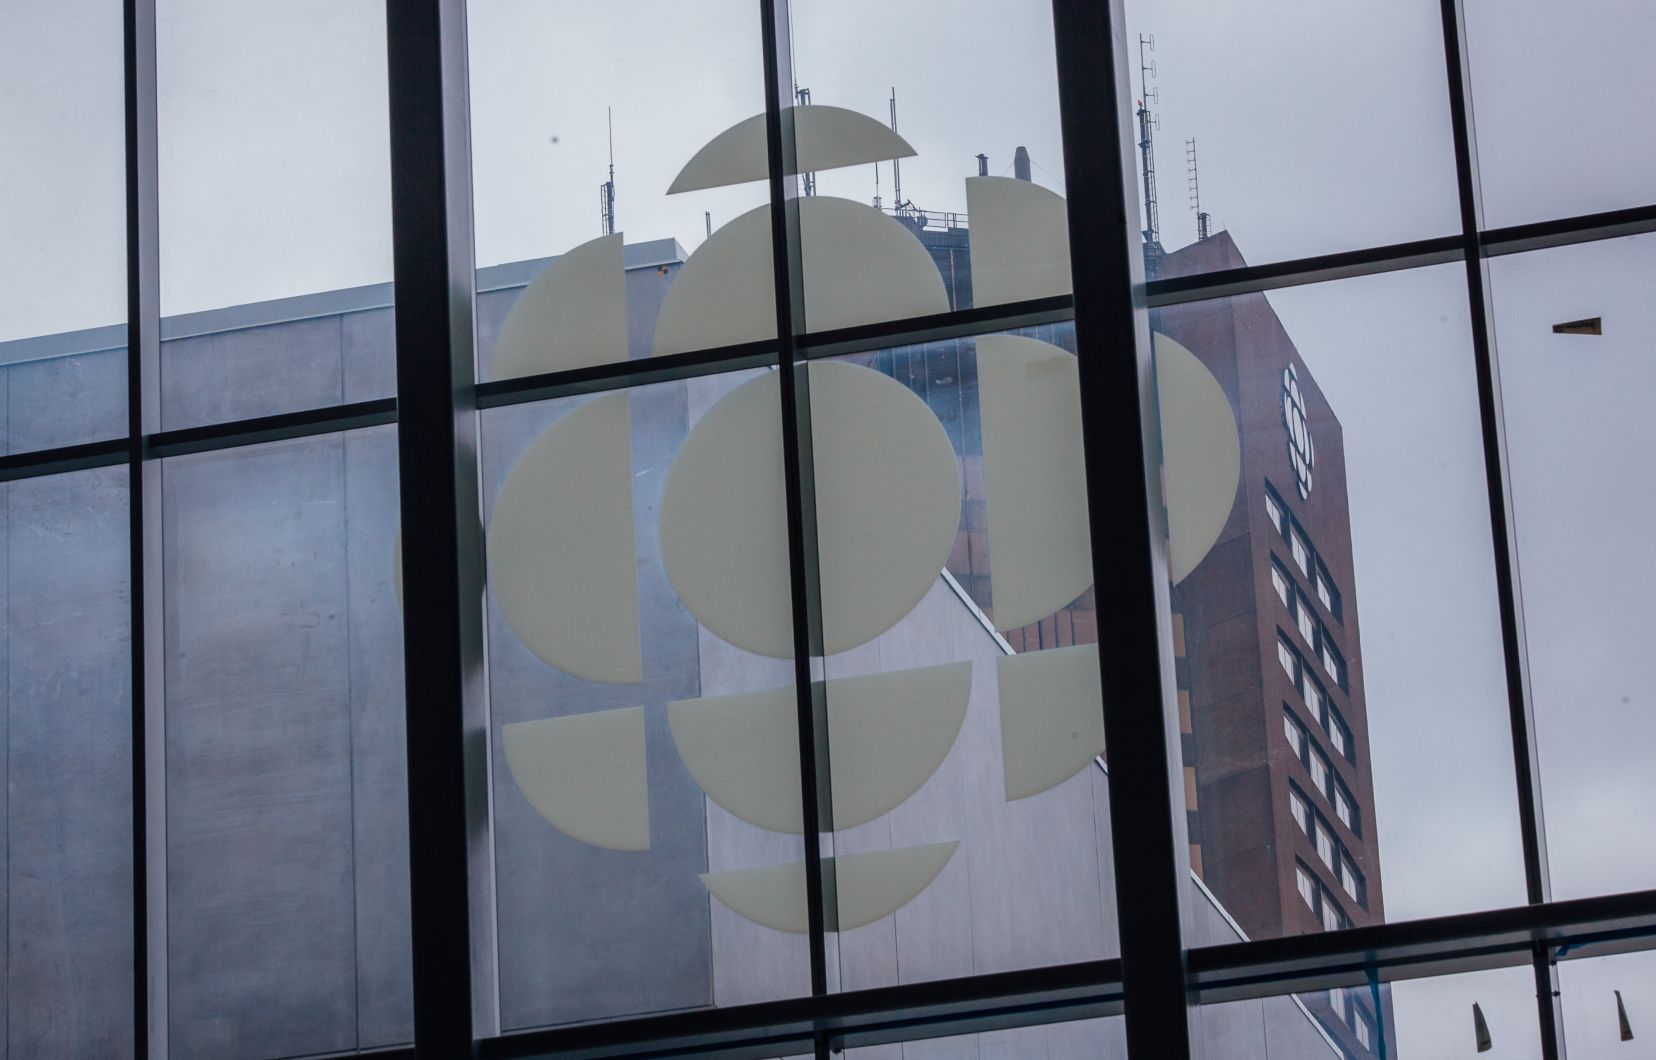 CRTC Hearings: Radio Canada demands fewer restrictions to compete with web giants

